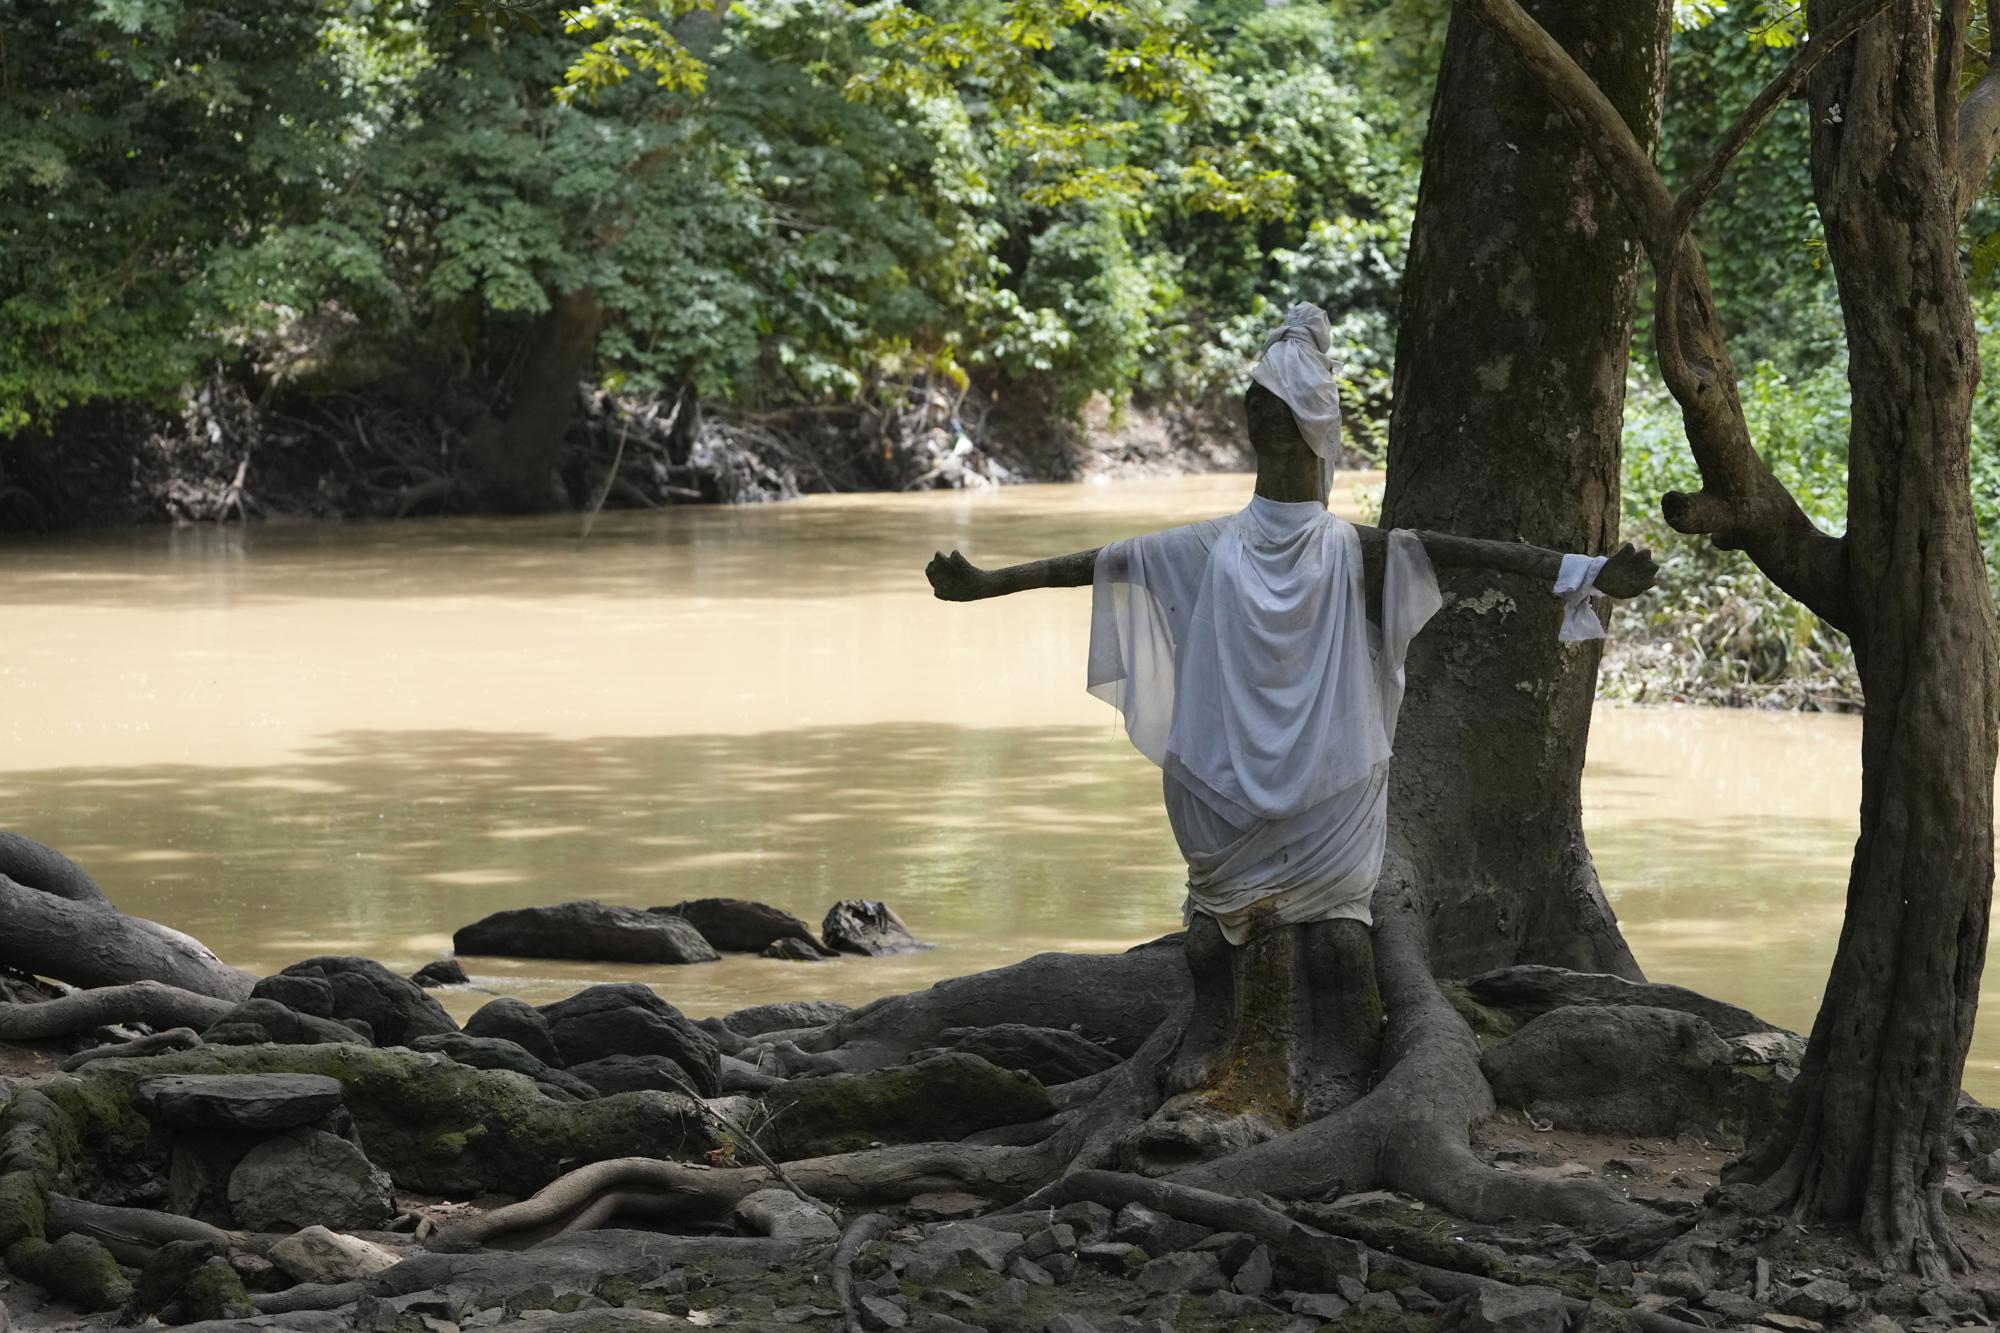 A statue of the goddess of fertility stands at the sacred Osun River in Osogbo, Nigeria, on Sunday, May 29, 2022. Some say the goddess heals them of afflictions when they drink or bathe in the river, and others say she can provide wealth or fertility. (AP Photo/Sunday Alamba)